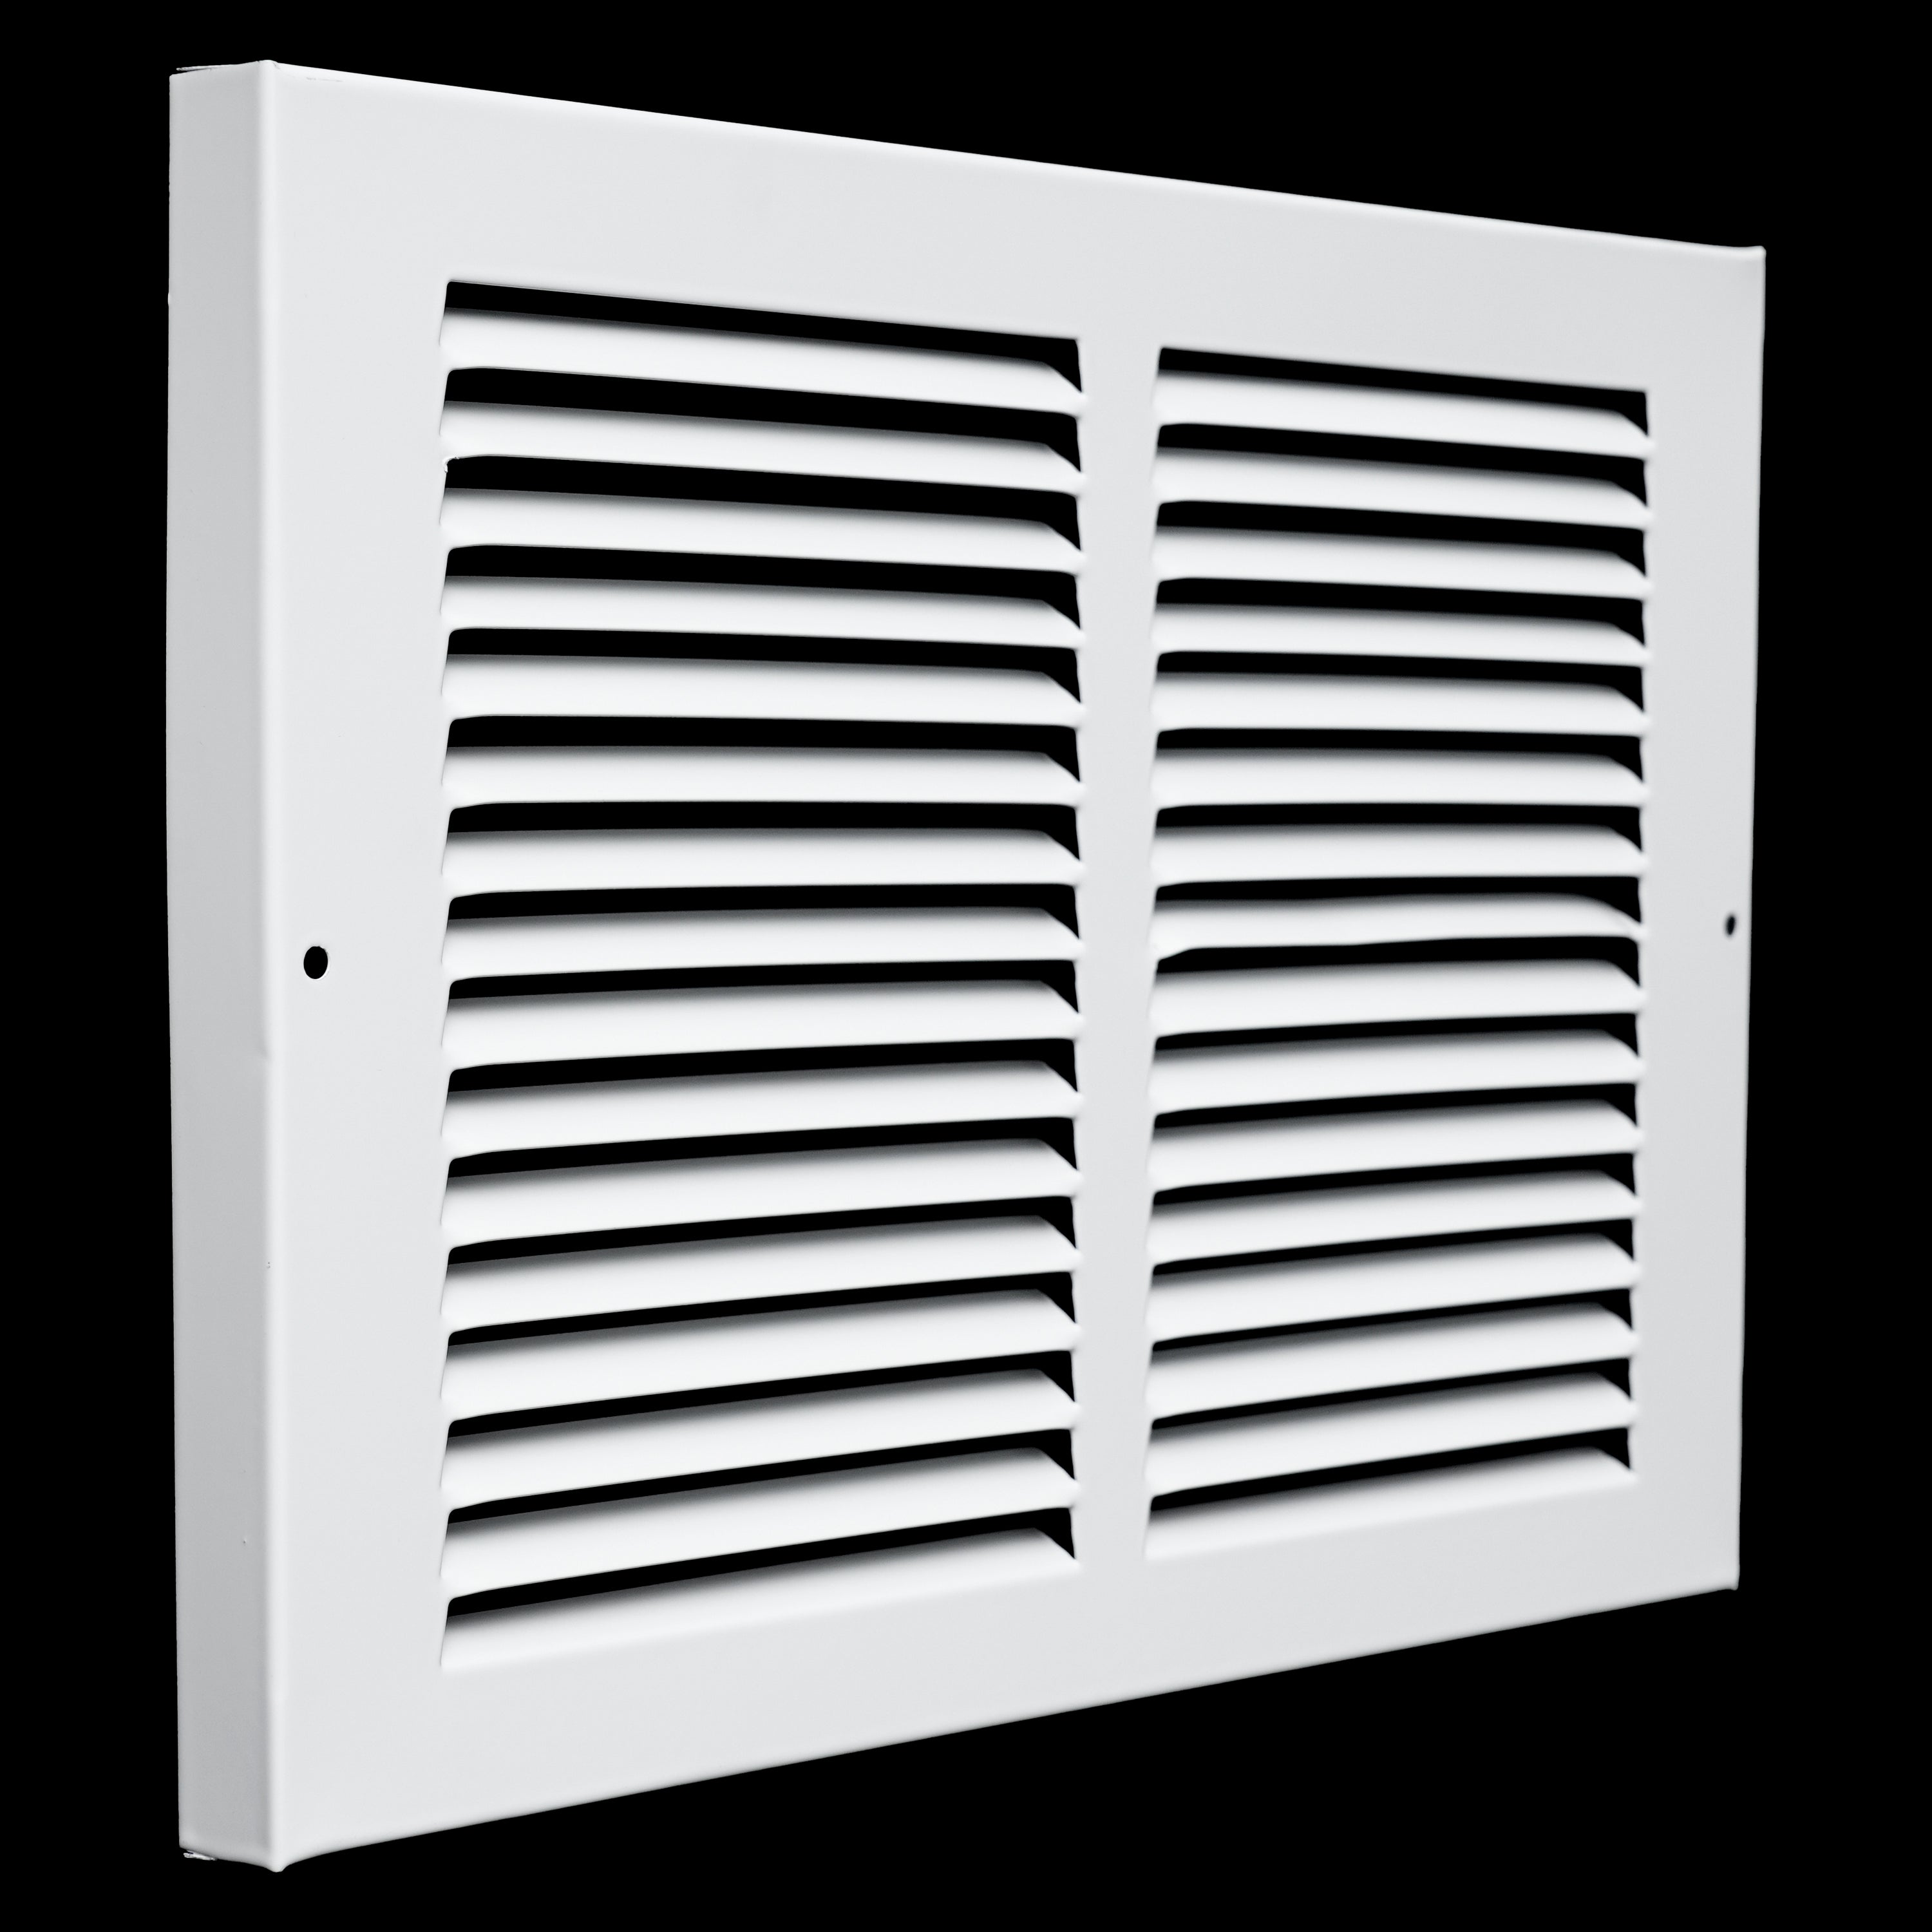 airgrilles 12"w x 8"h baseboard return air grille  -  vent cover grill  -  7/8" margin turnback to fit baseboard  -  white  -  outer dimensions: 13.75"w x 9.75"h for 12x8 duct opening hnd-bra-wh-12x8  - 1